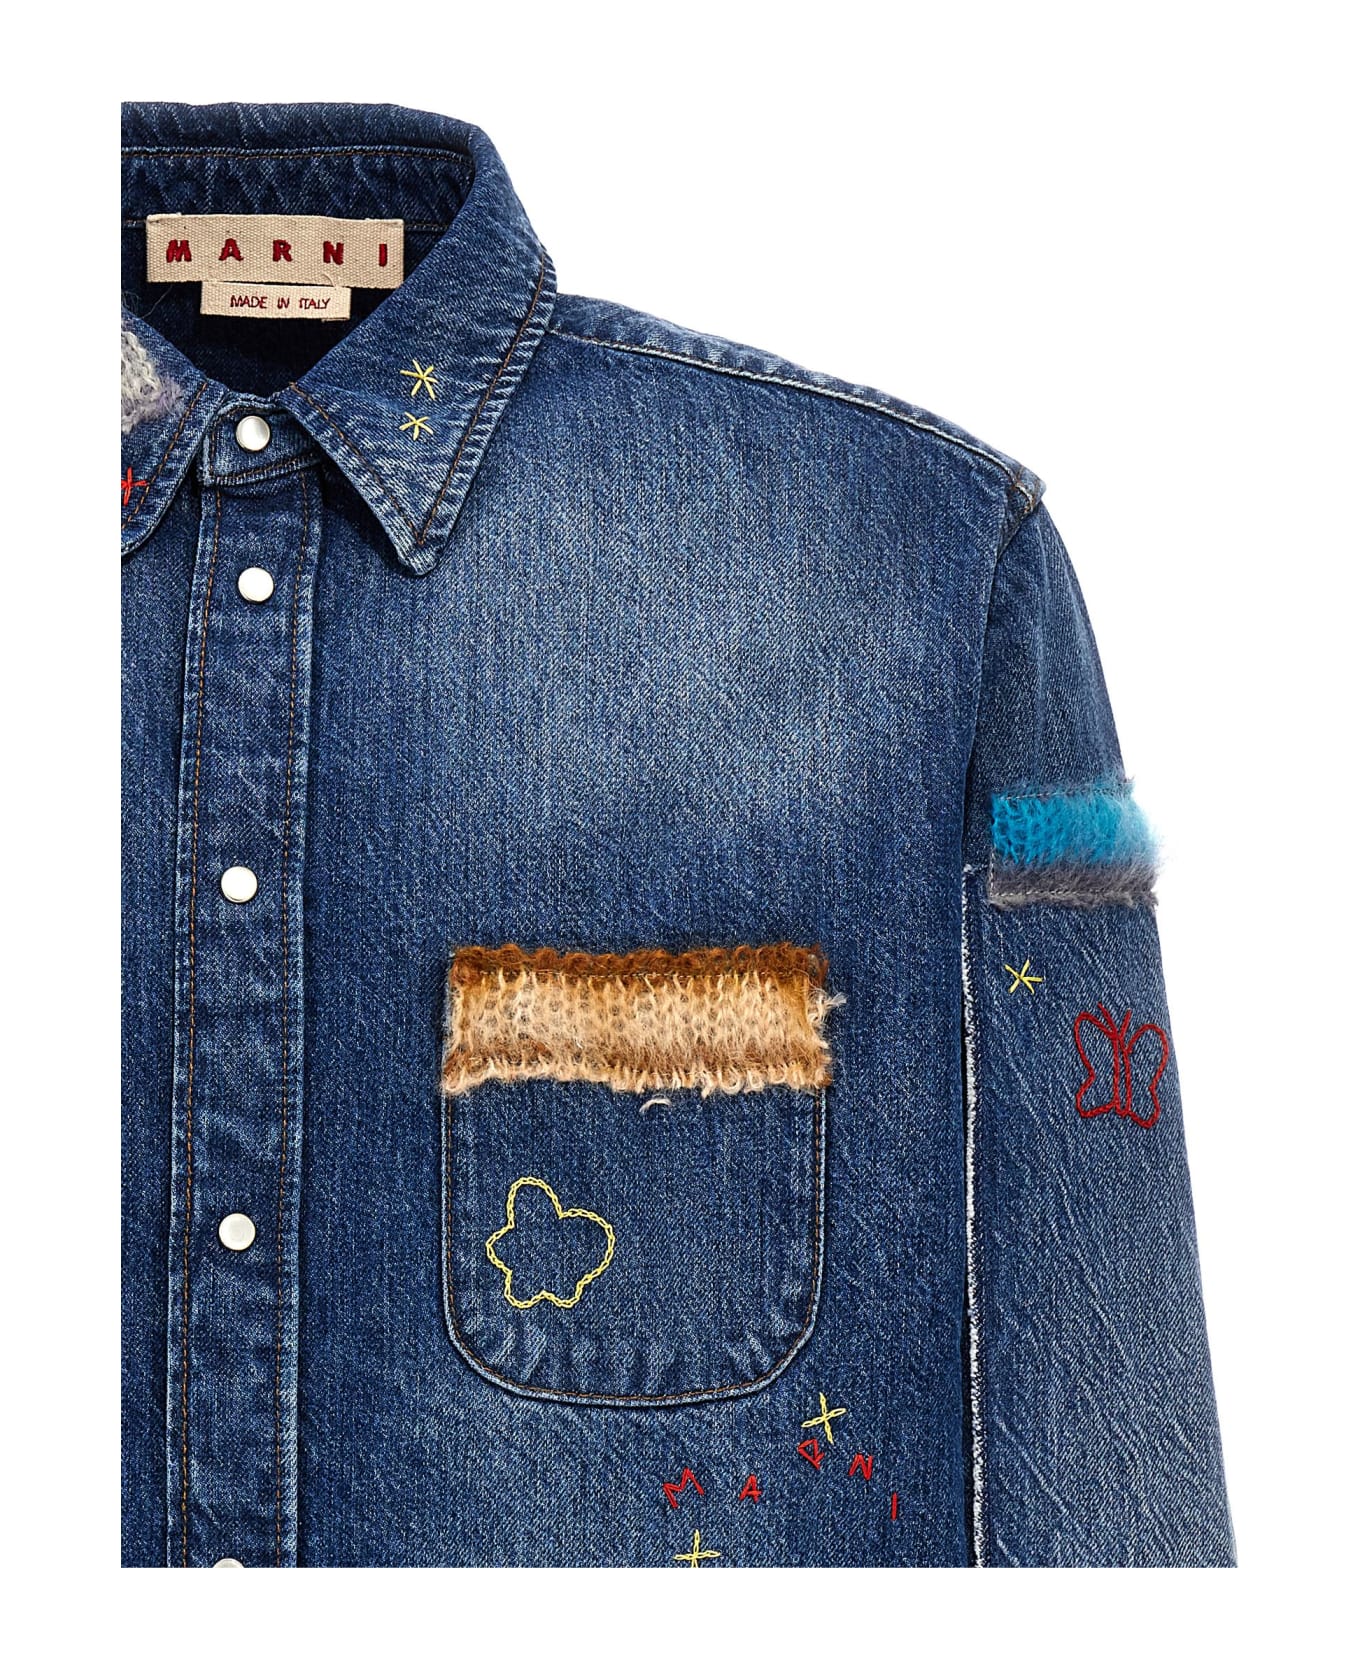 Marni Denim Shirt, Embroidery And Patches - BLUE/MULTICOLOUR